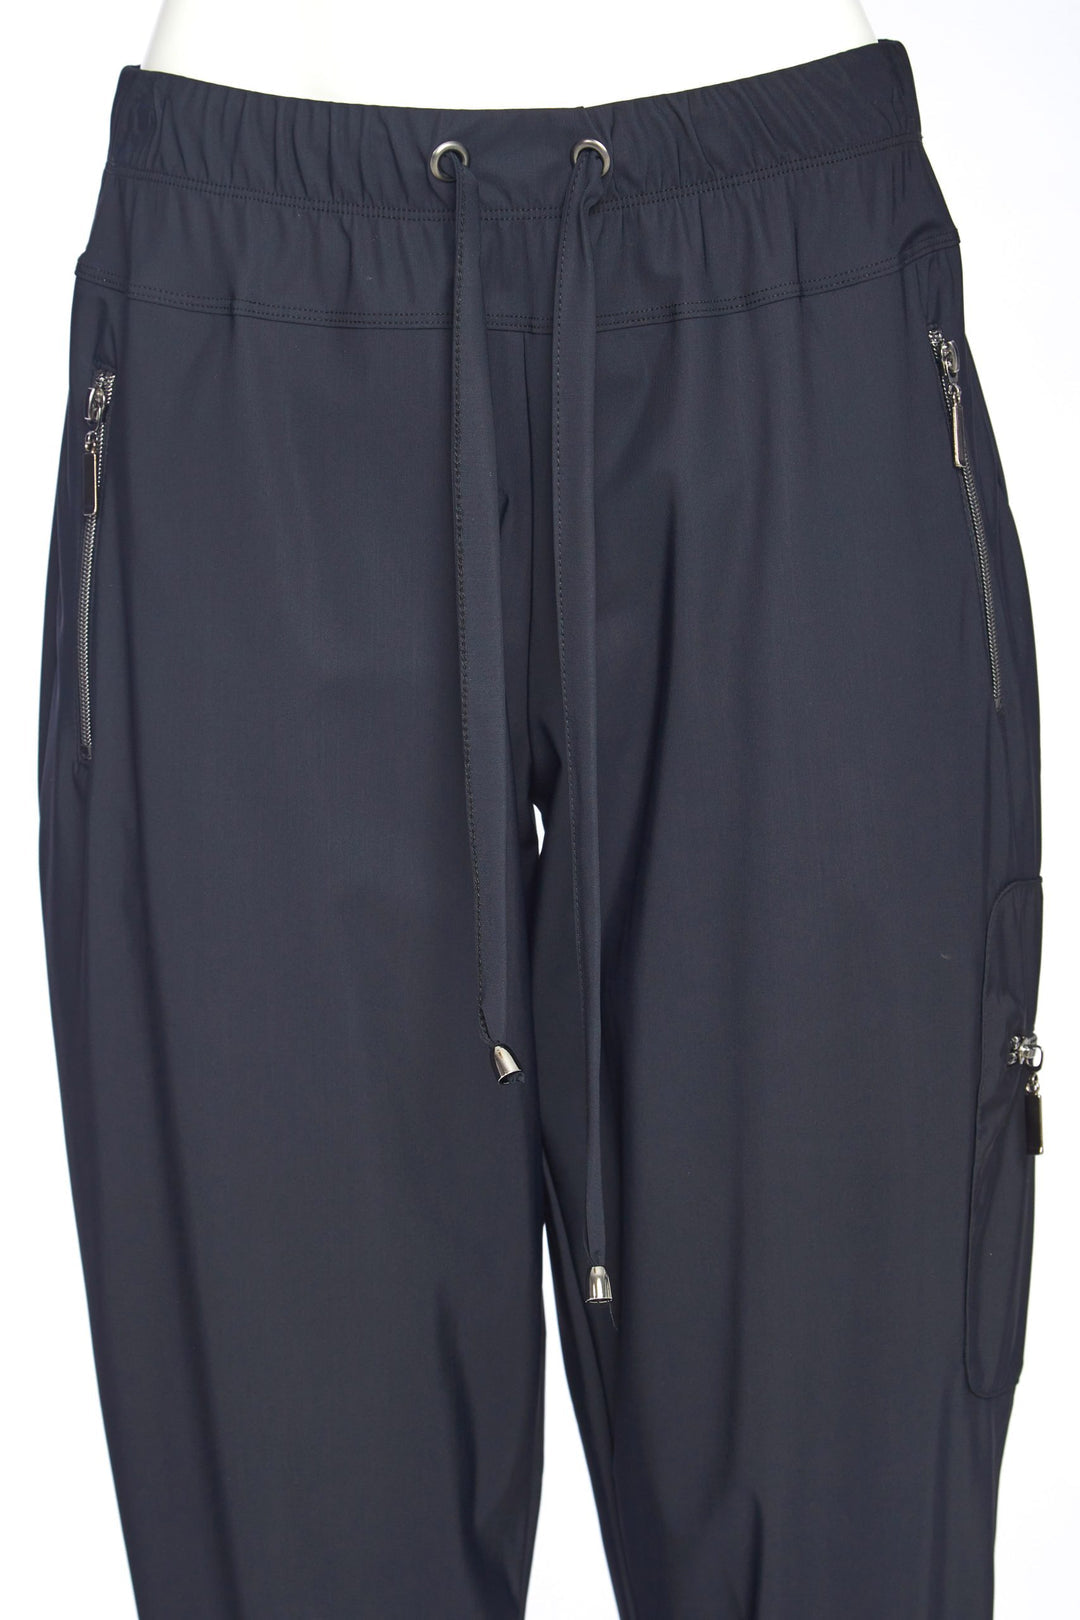 NAYA cuff travel fabric trousers with zip pockets in anthracite